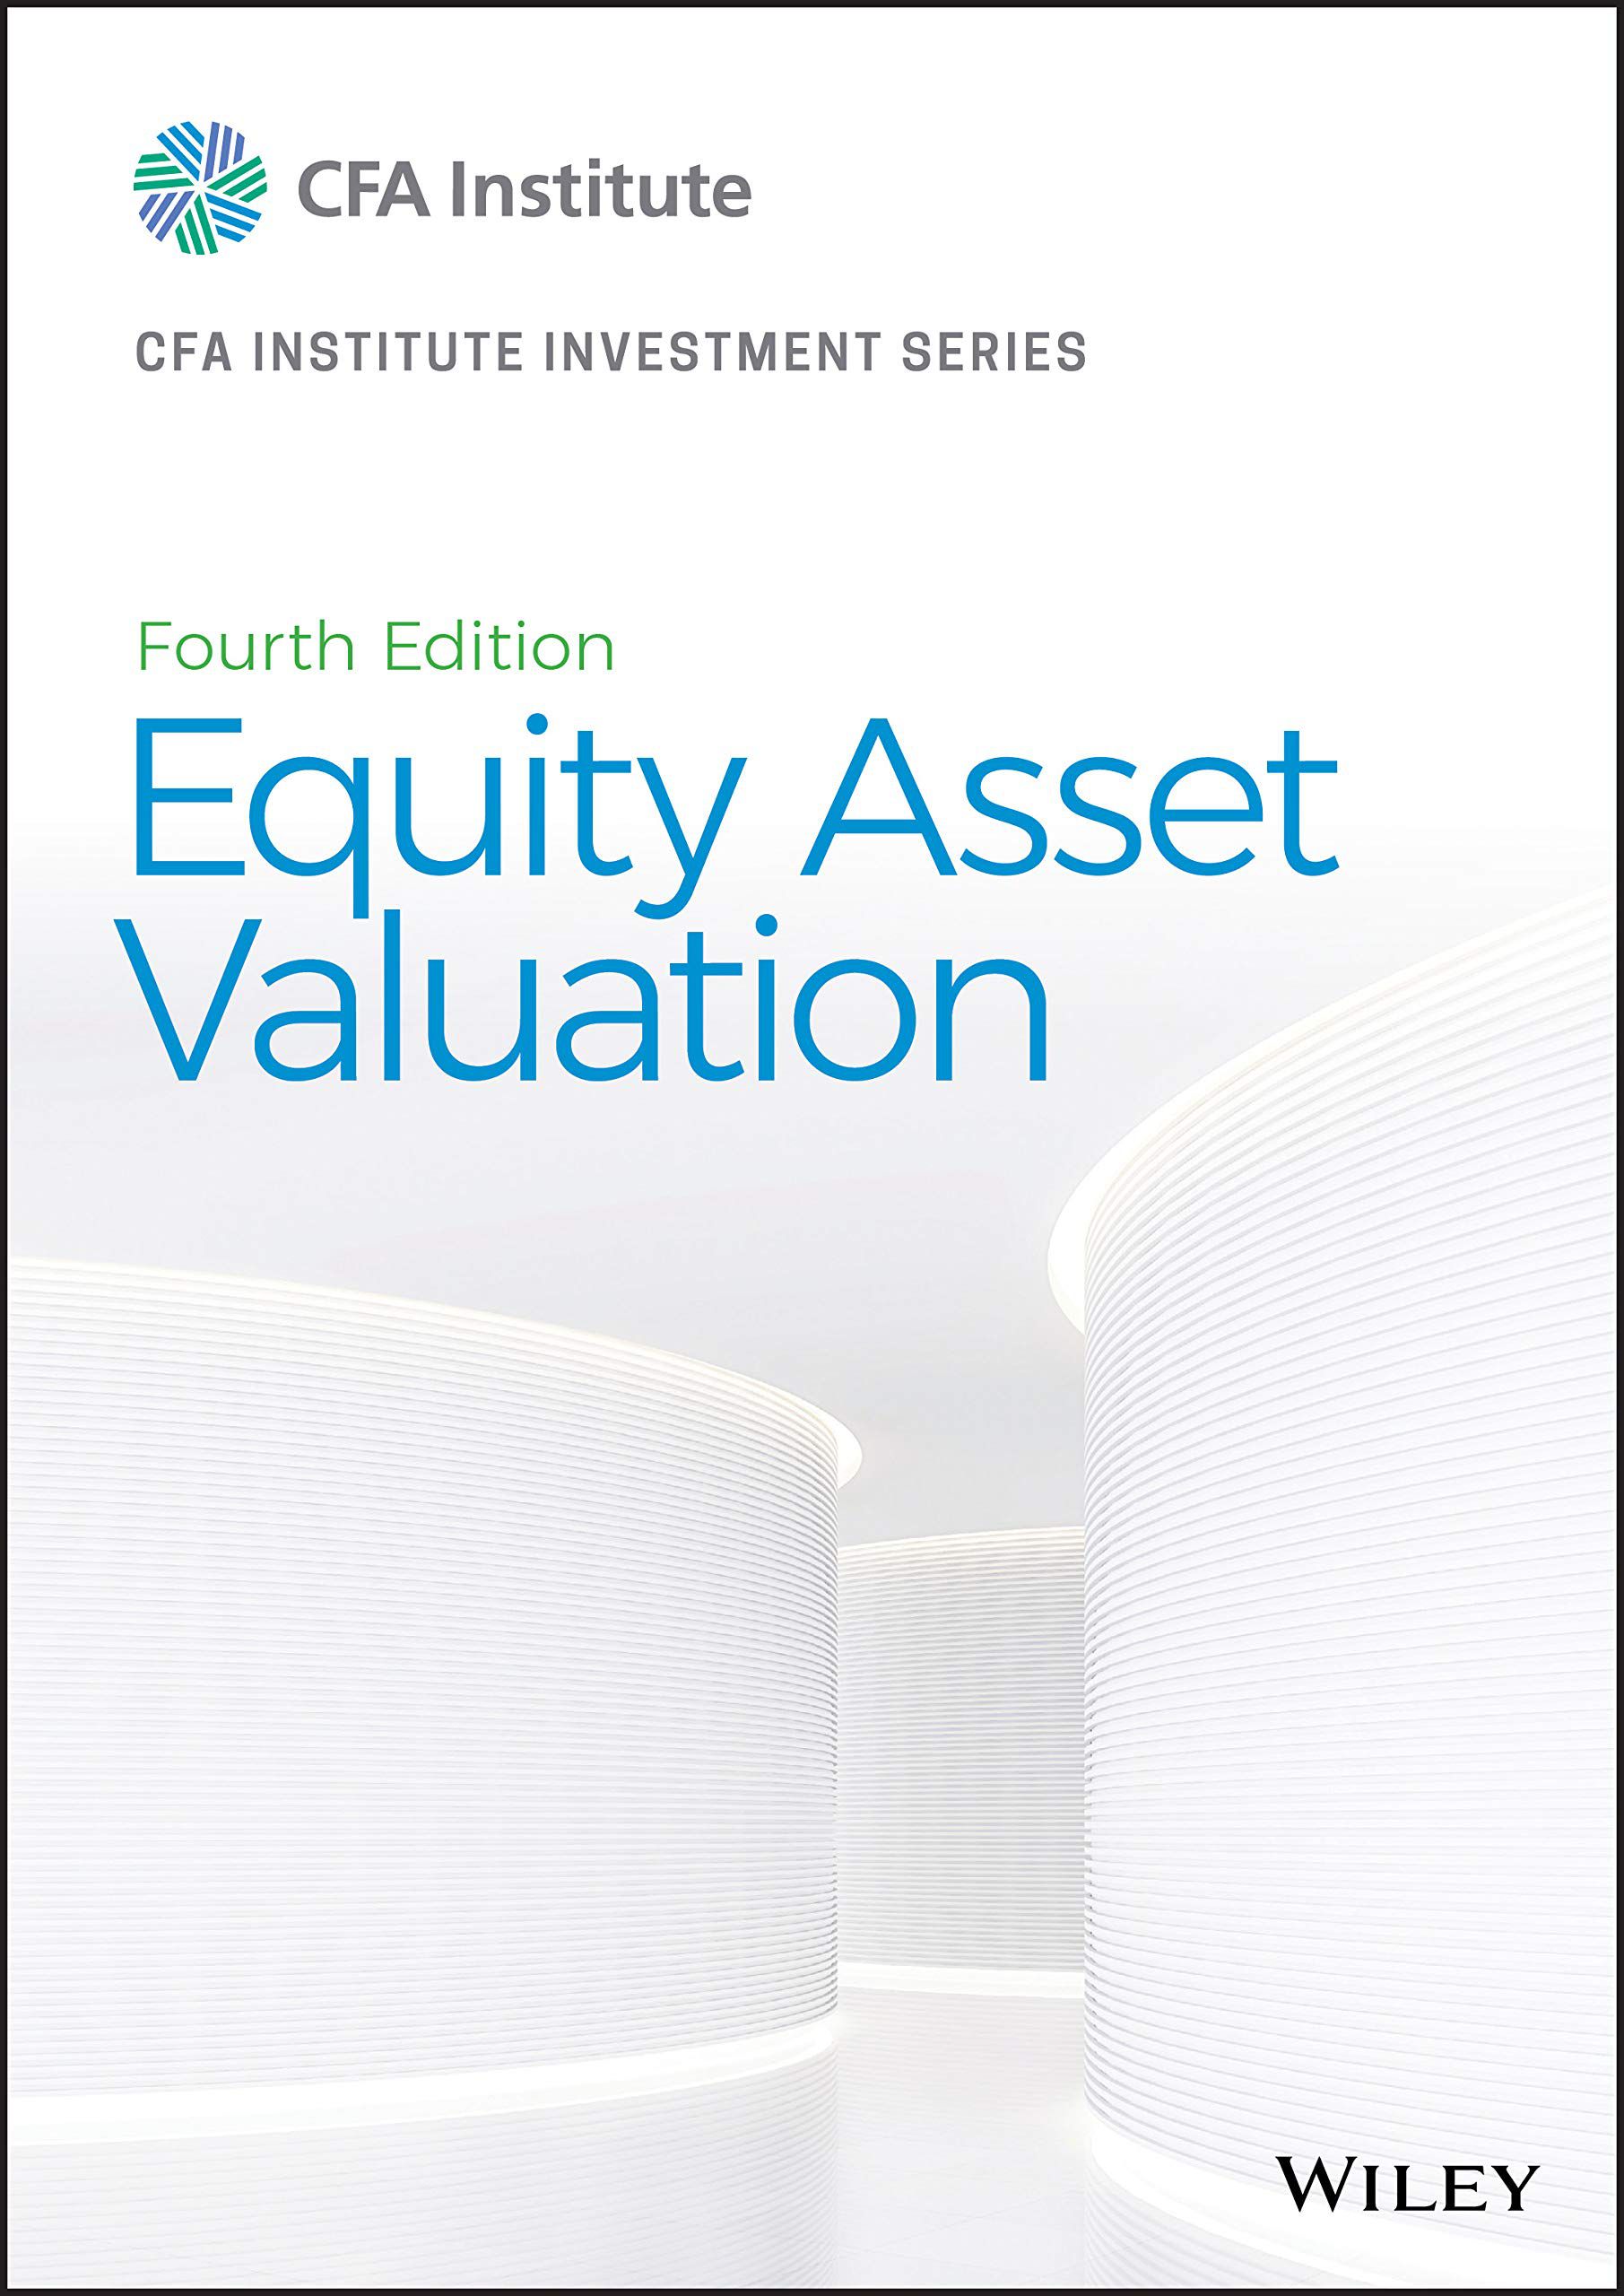 Equity asset valuation